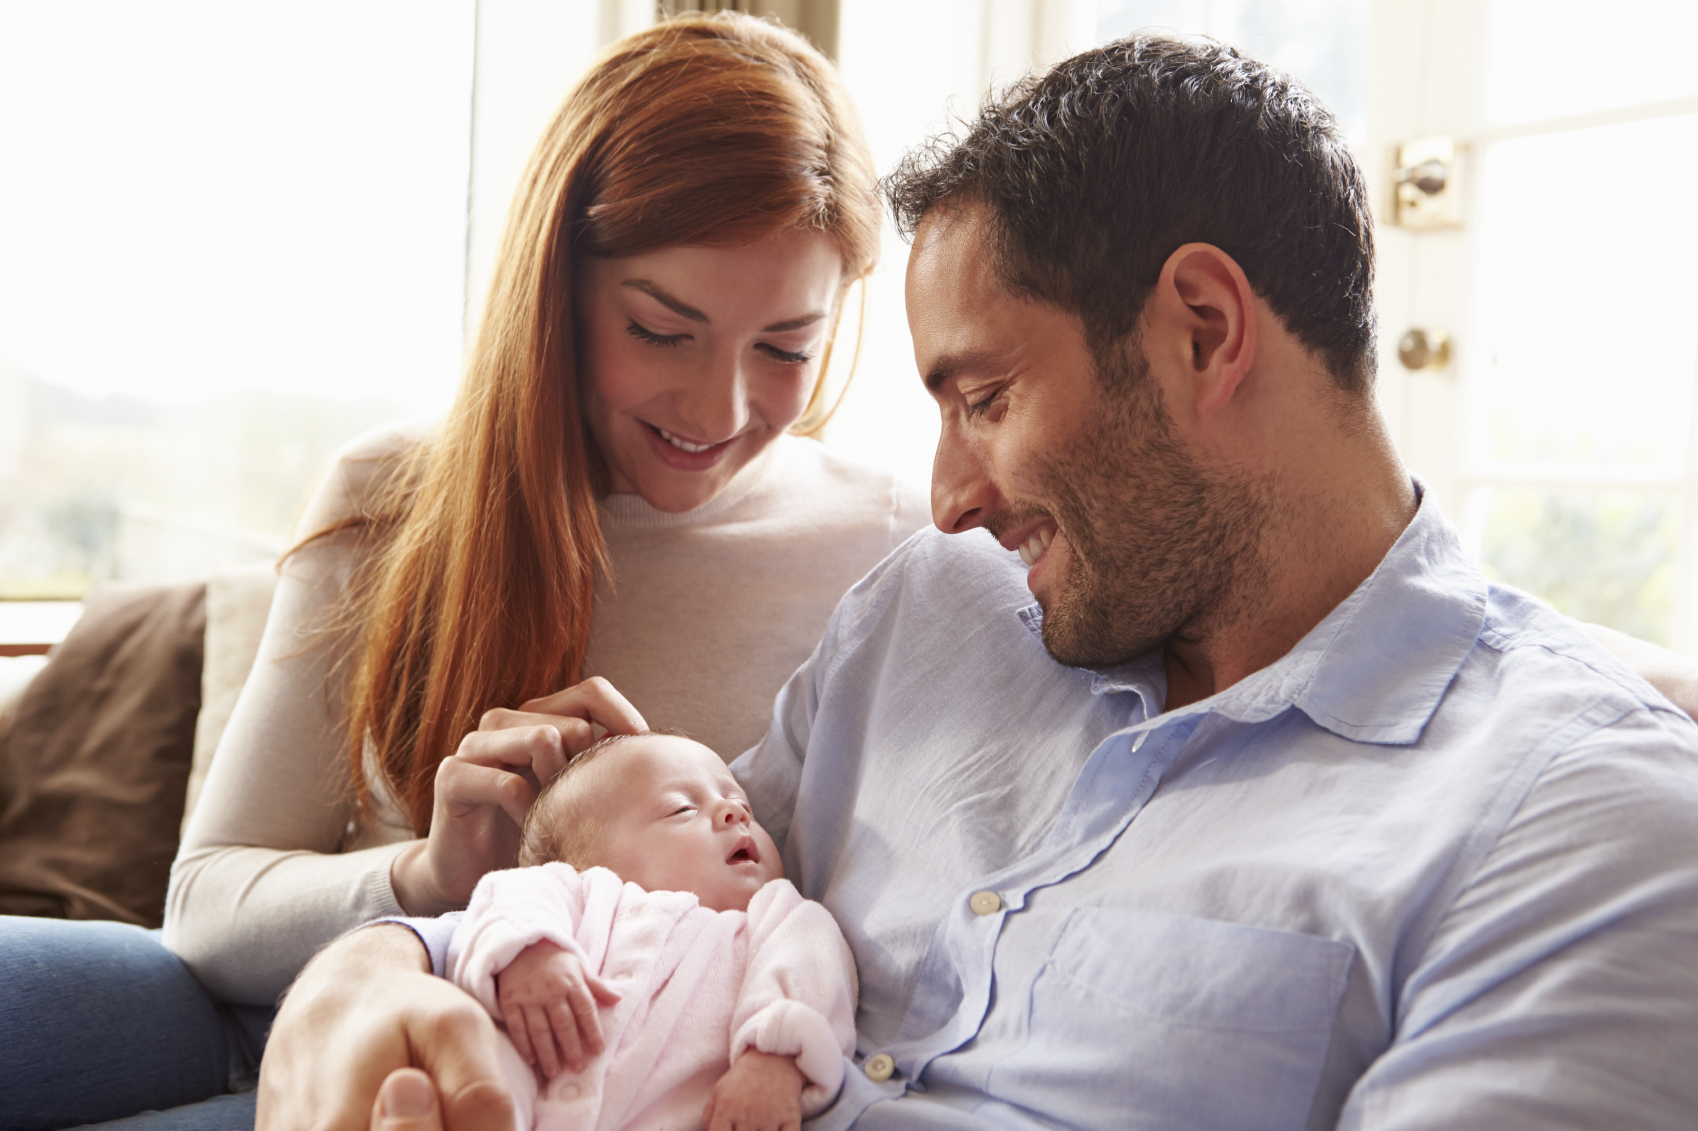  Learn More About Home Visits For Your Newborn